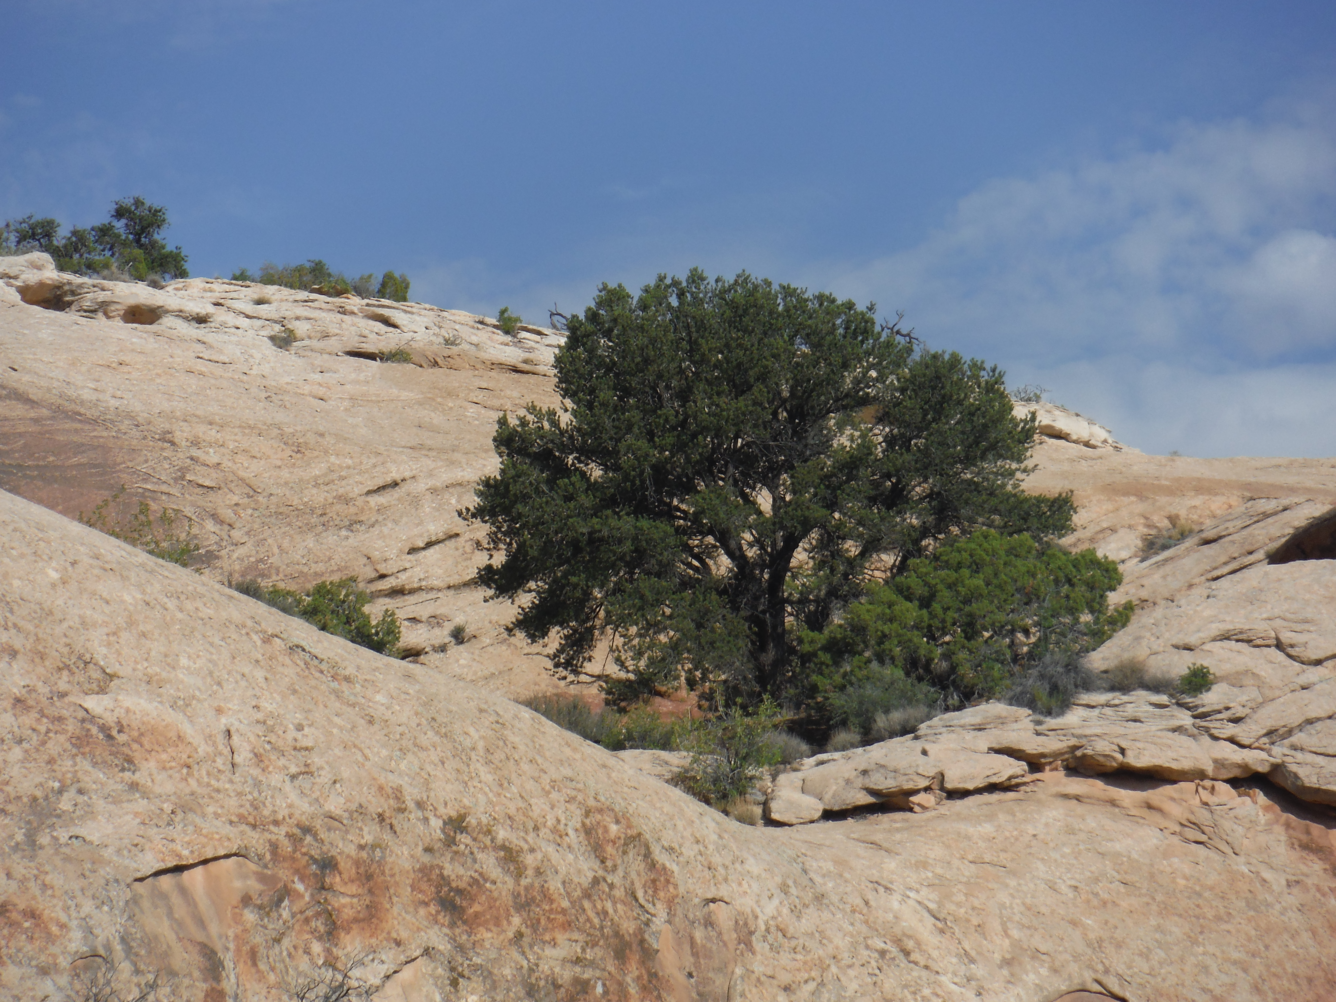 A pinyon pine and other vegetation near the Monitor and Merrrimac Buttes in eastern Utah.